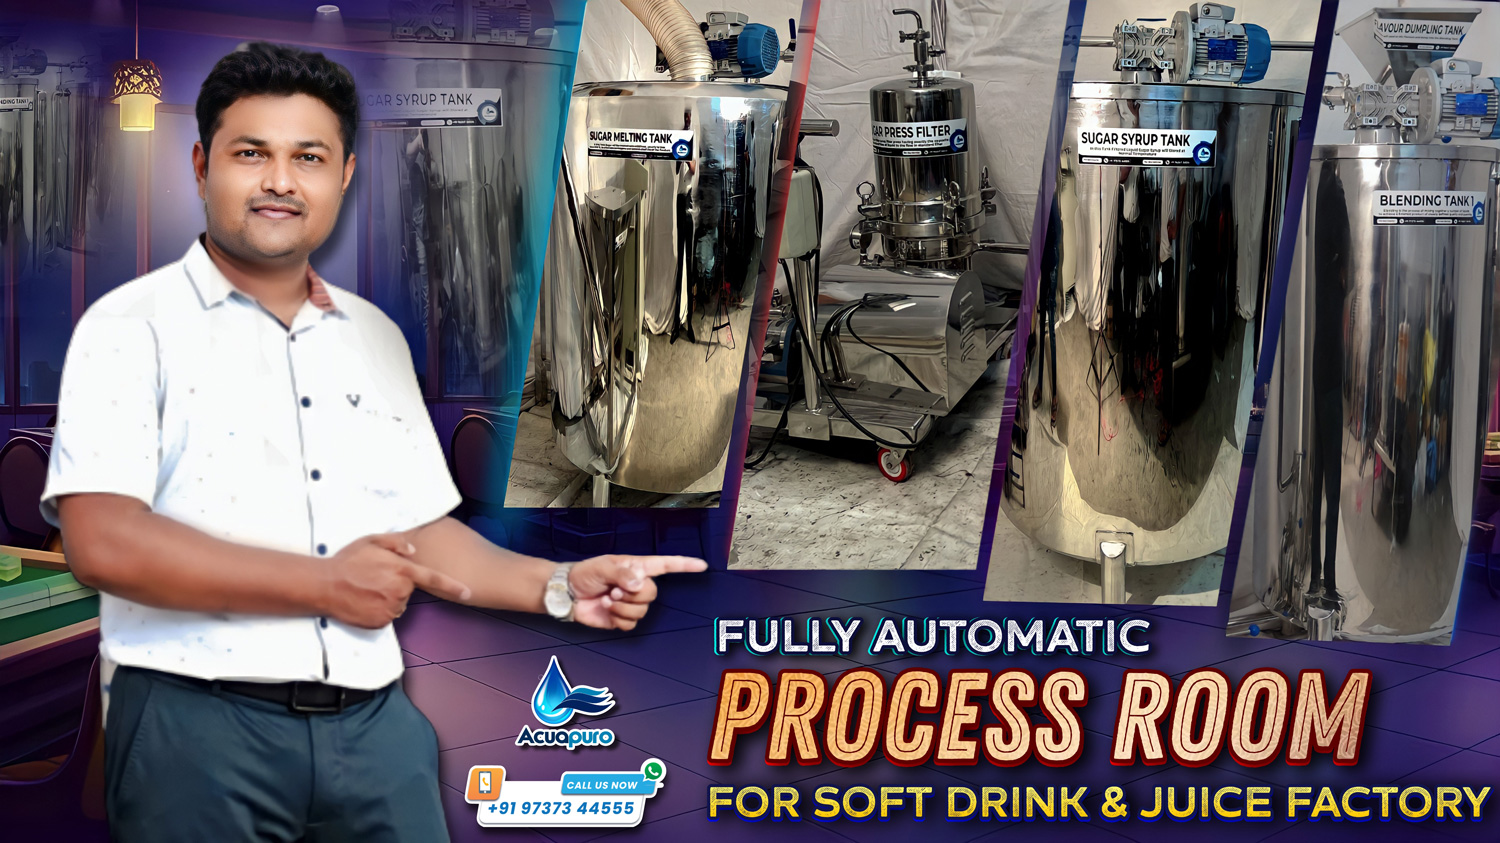 Inside the Process Room Unveiling Soft Drink and Juice Factory Automation